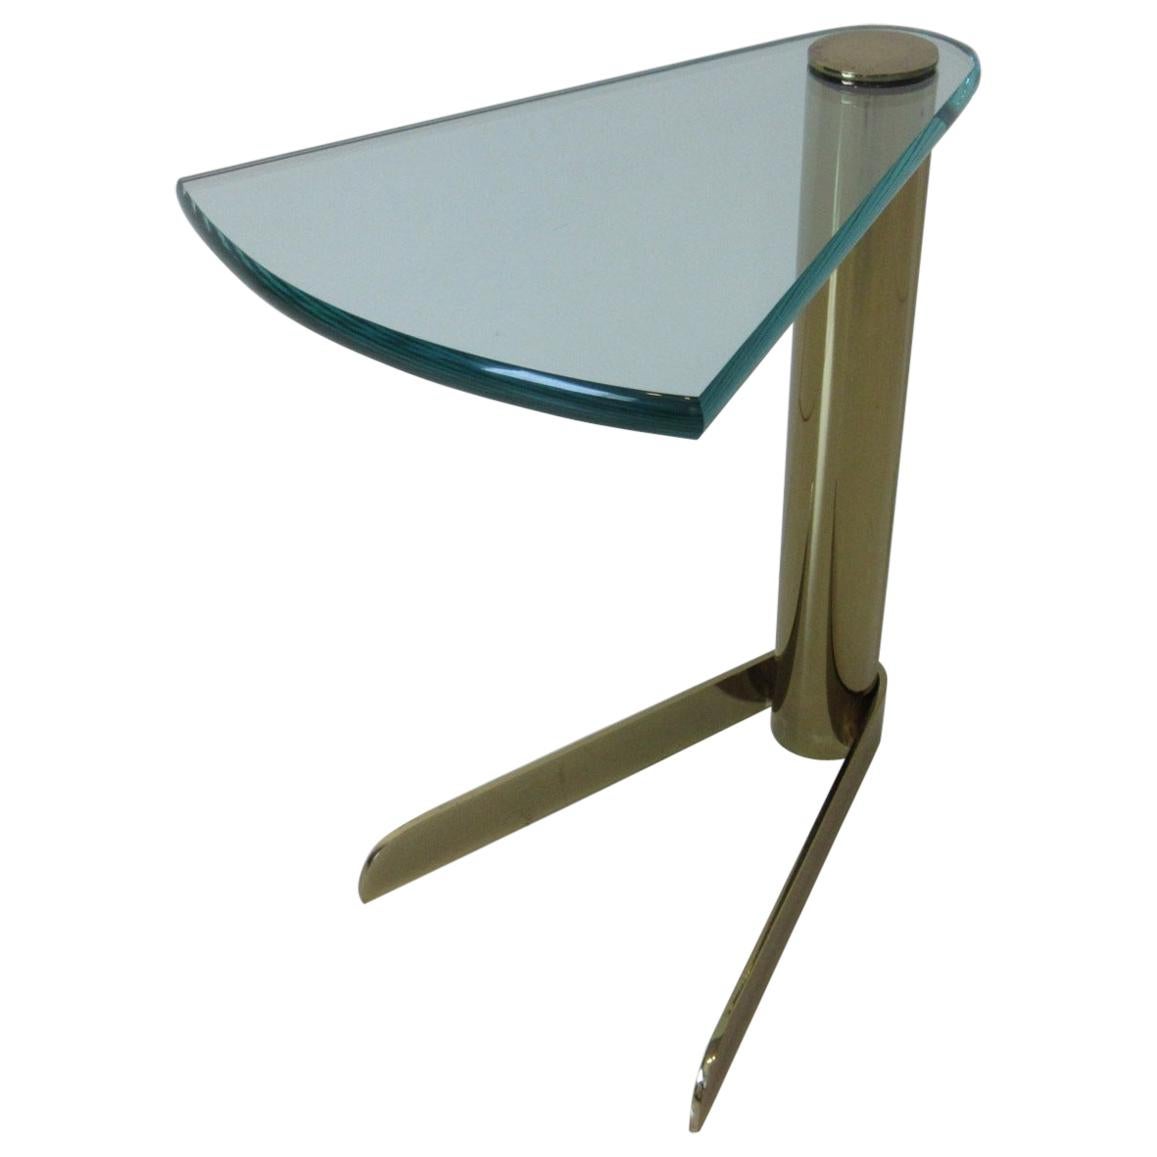 Wedge Brass / Glass Side Table from the Leon Pace Collection